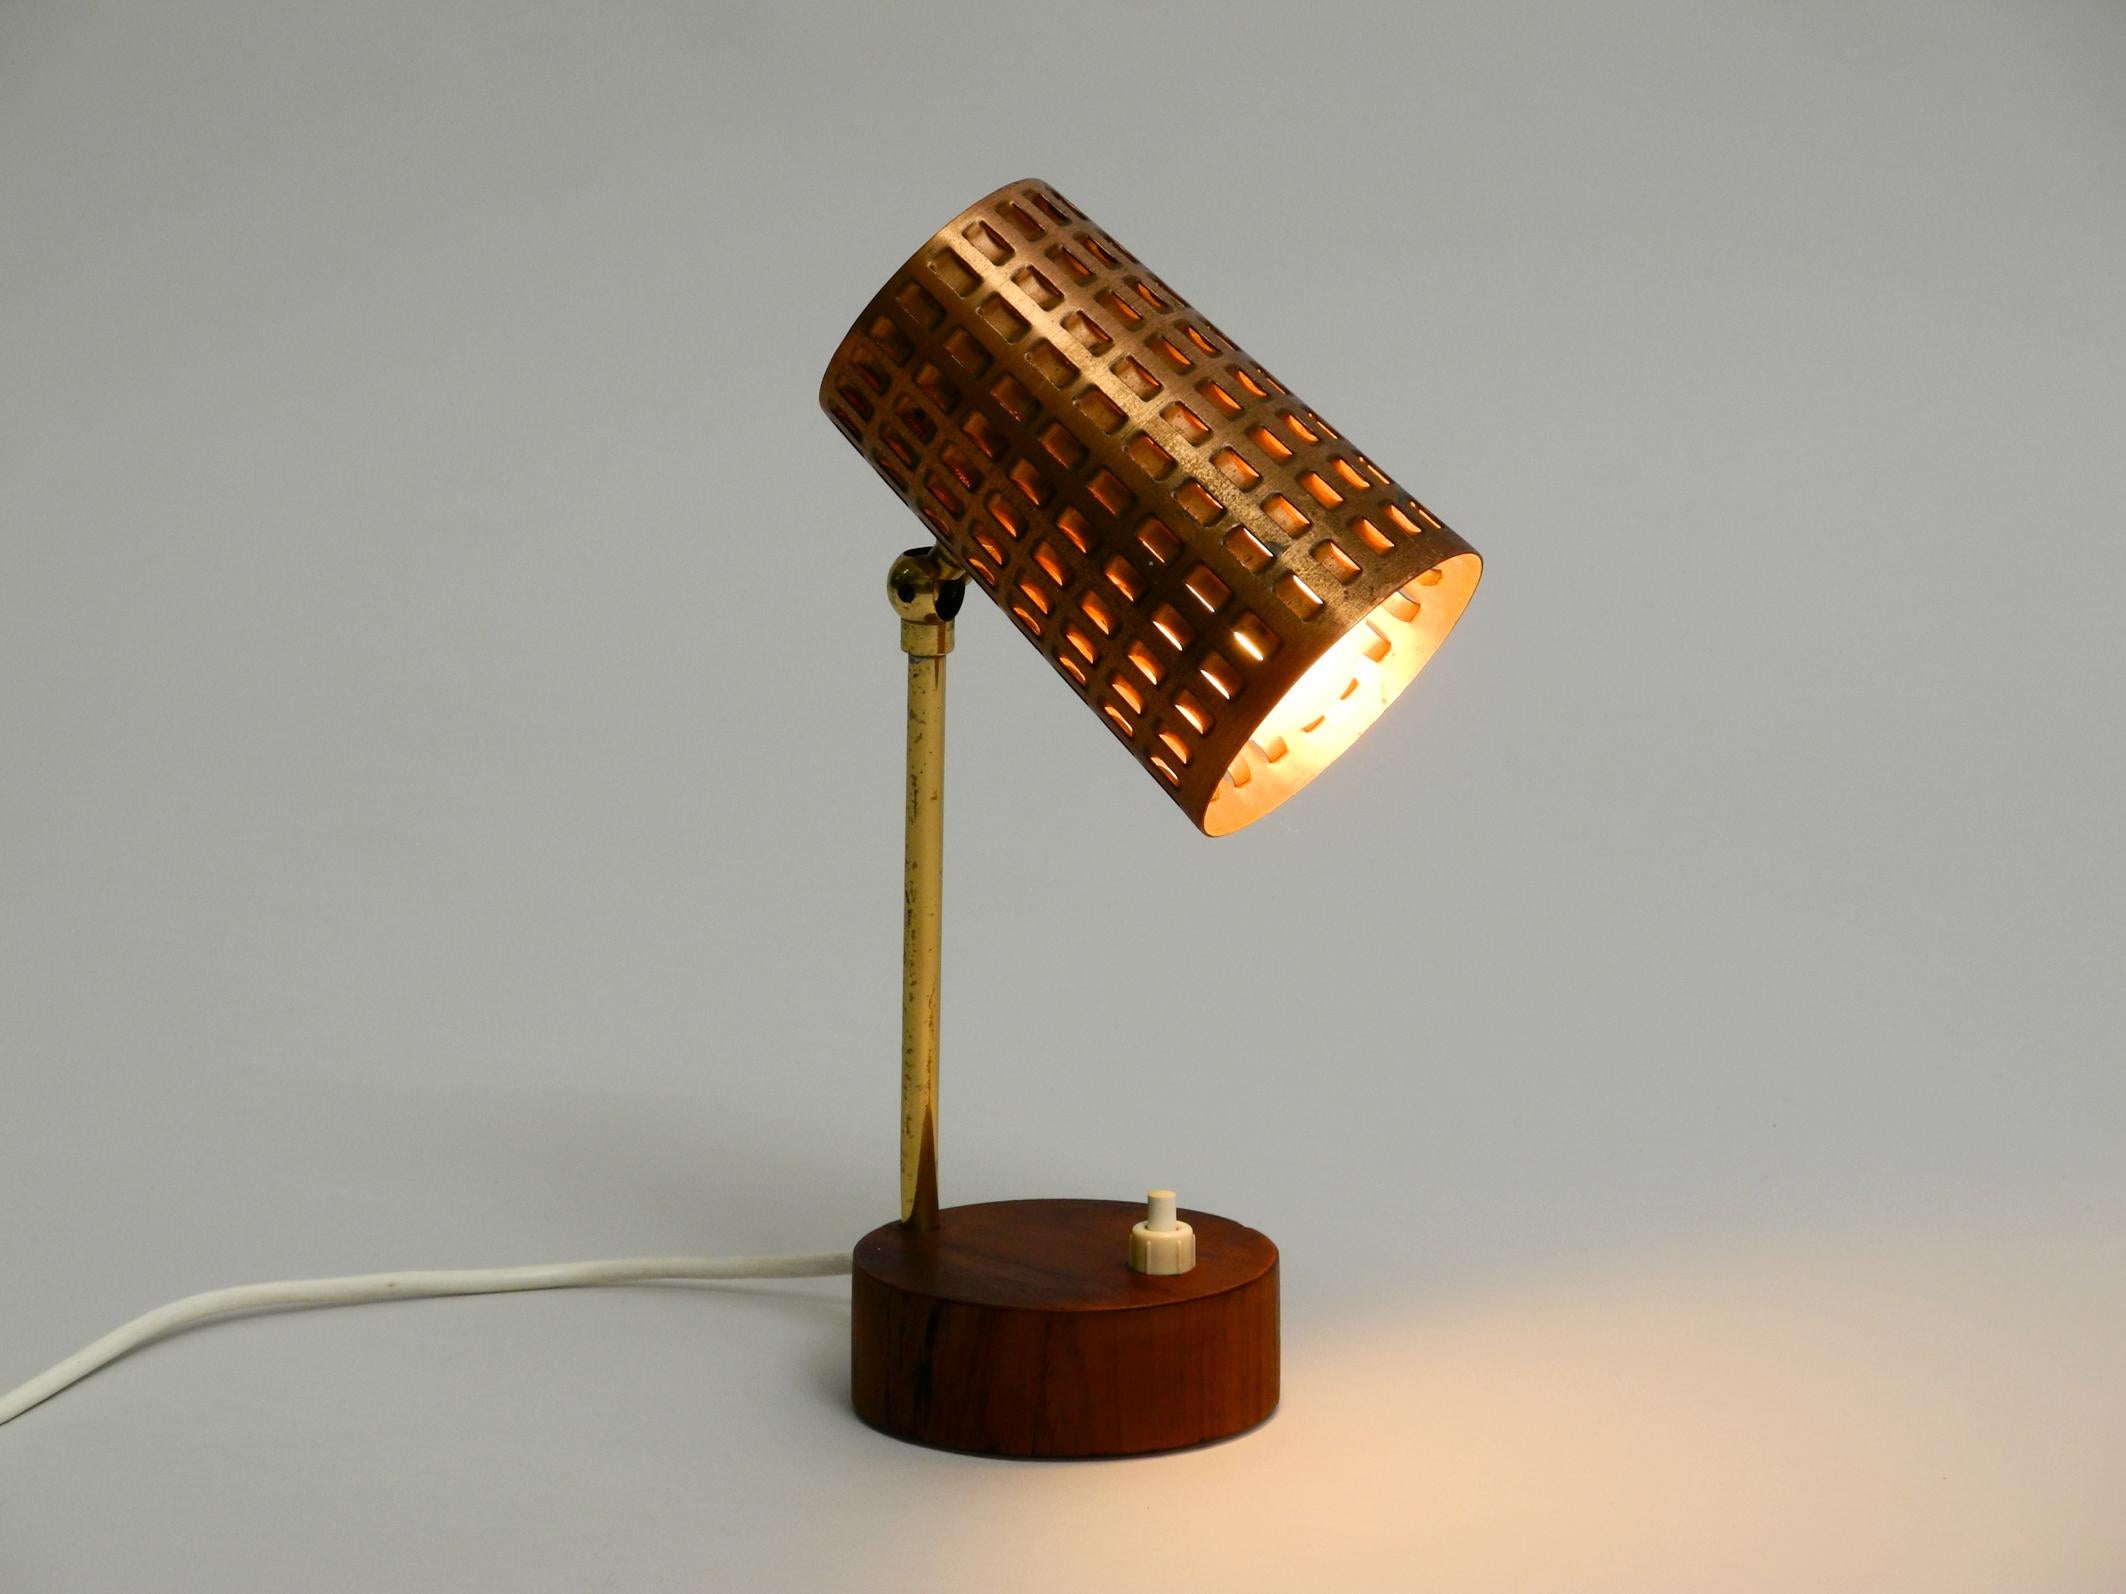 Rare very nice midcentury table or night lamp
with perforated metal shade made of copper. 
Neck is made of brass. Base is with teak verneer.
Very nice design of the 1950s with great patina.
Shade is steplessly adjustable up and down.
100%